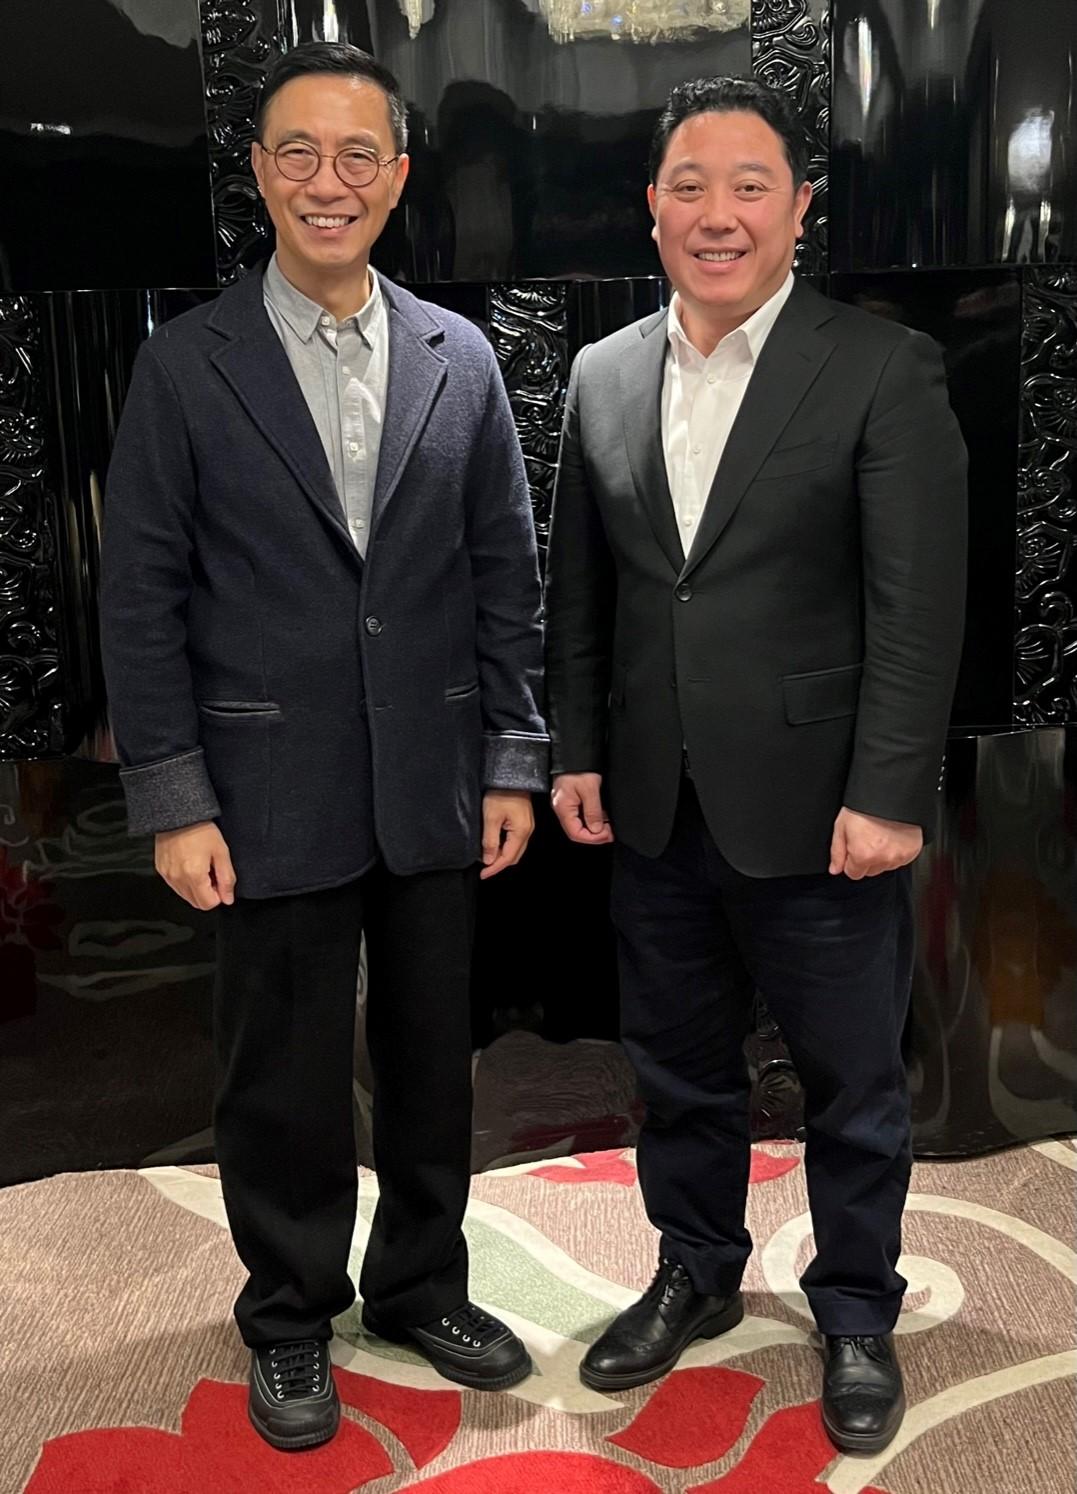 The Secretary for Culture, Sports and Tourism, Mr Kevin Yeung (left), met with the Director General of the Hong Kong and Macao Affairs Office of the Shanghai Municipal Government, Mr Kong Fuan (right), yesterday (January 7) and updated him on the latest developments in Hong Kong and explored opportunities of collaborations and exchanges.